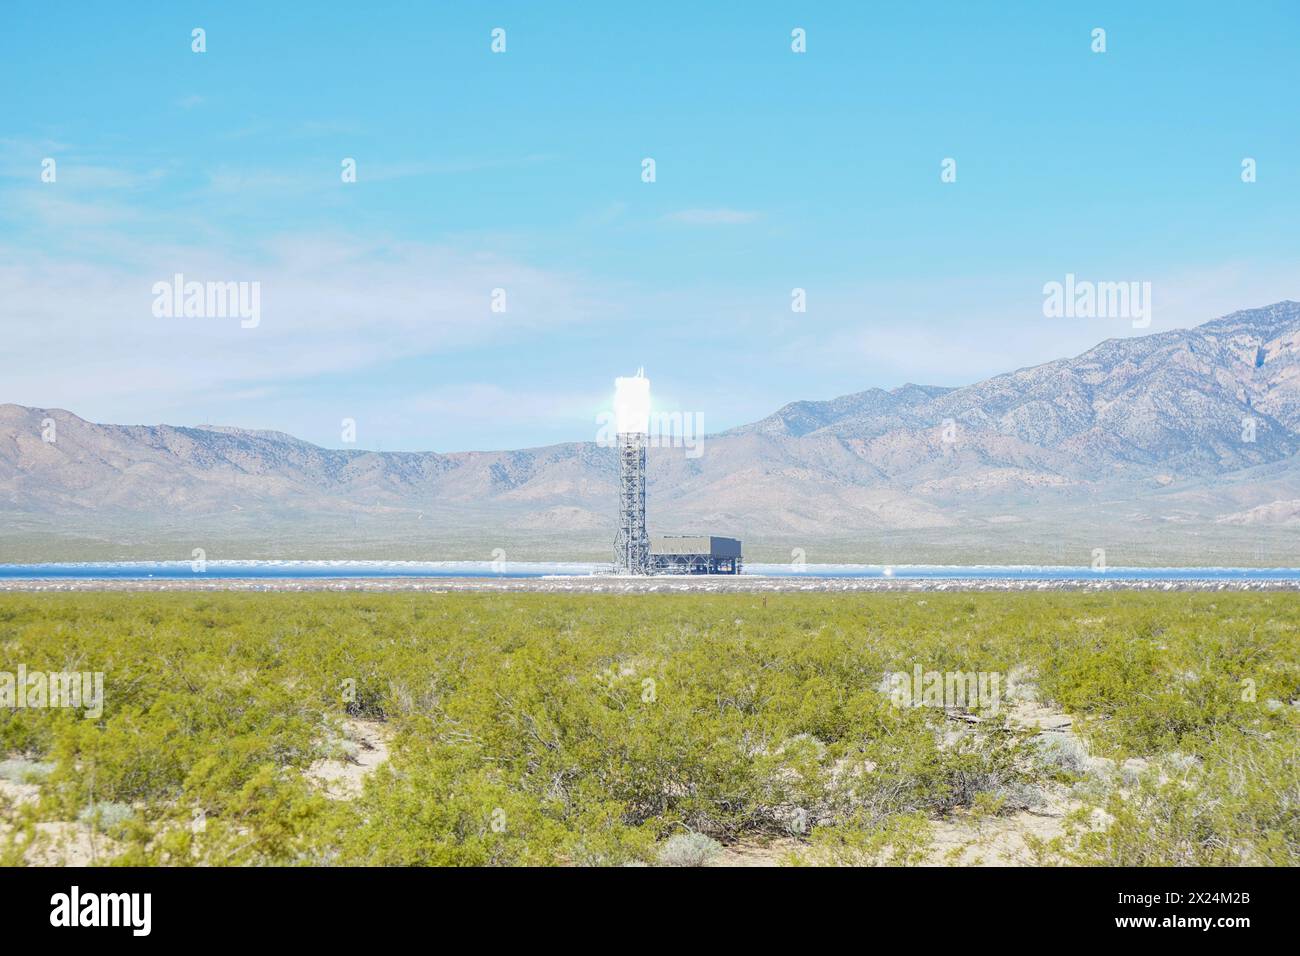 The Ivanpah Solar Electric Generating System. A concentrated solar thermal plant out in the middle of the Mojave Desert. Stock Photo